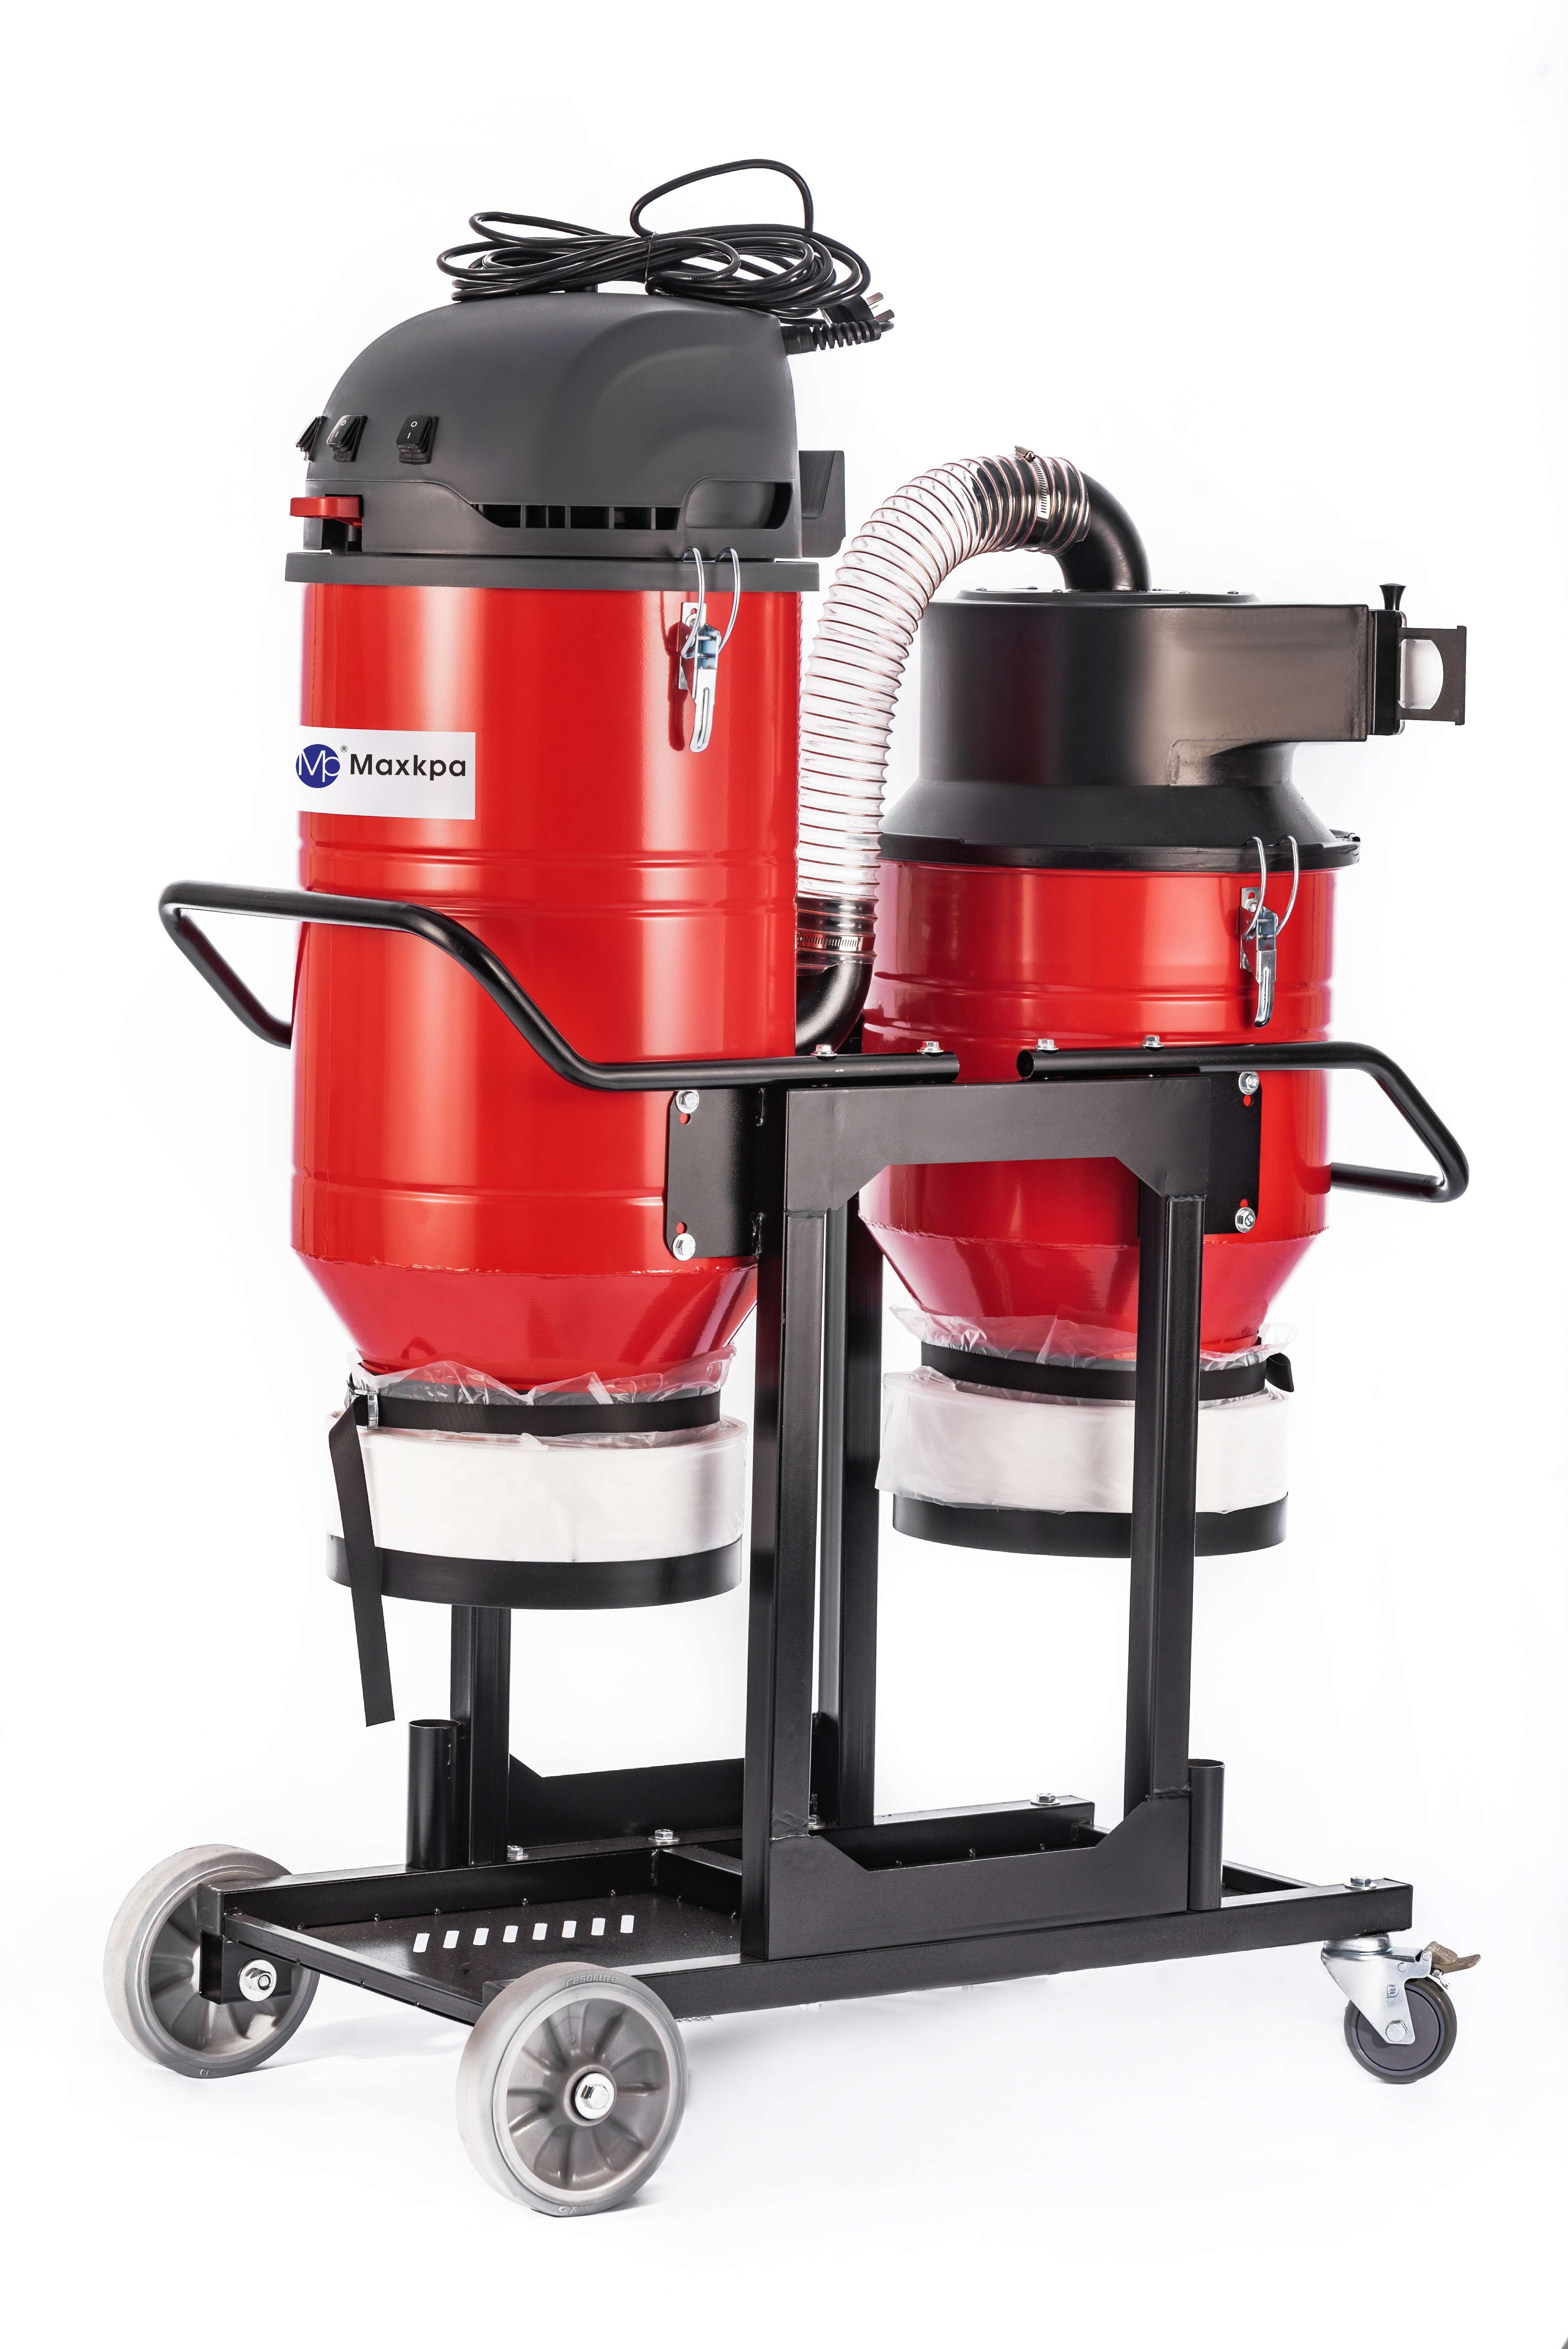 Industrial Vacuum Cleaner – The New Age of Cleaning Technology